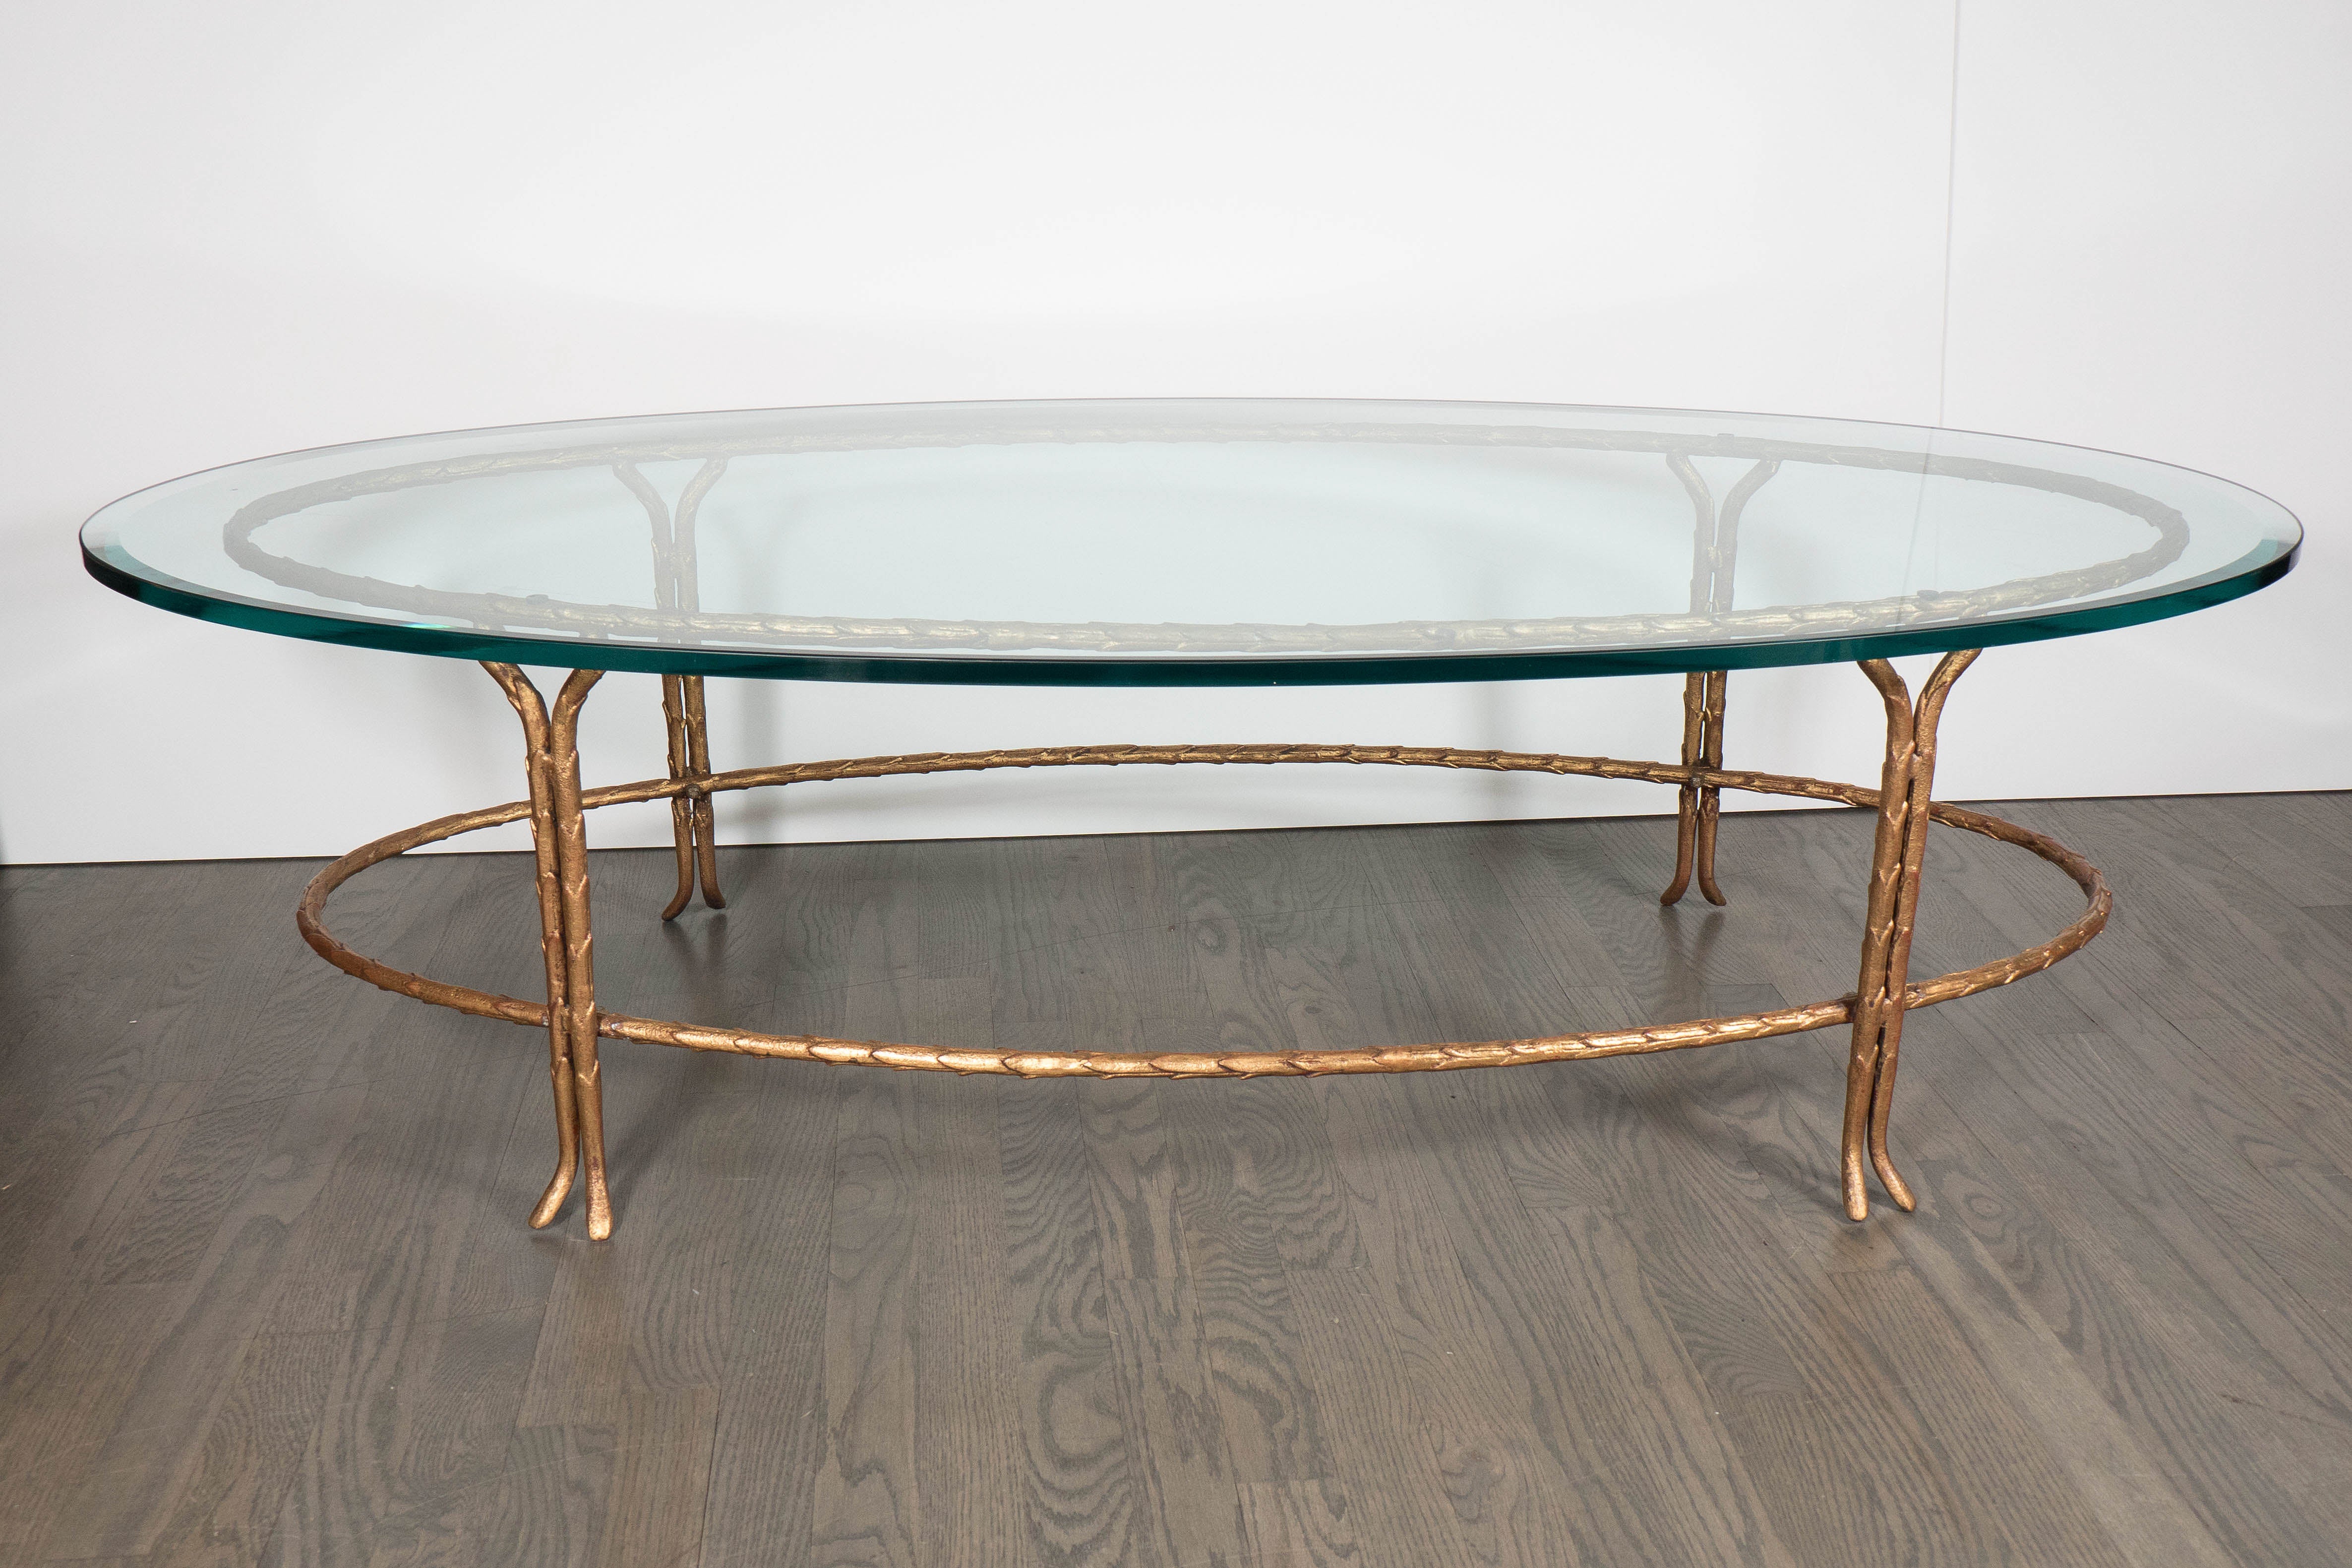 Elegant Bagues Gilt Bronze Oval Cocktail Table with Beveled Glass Top